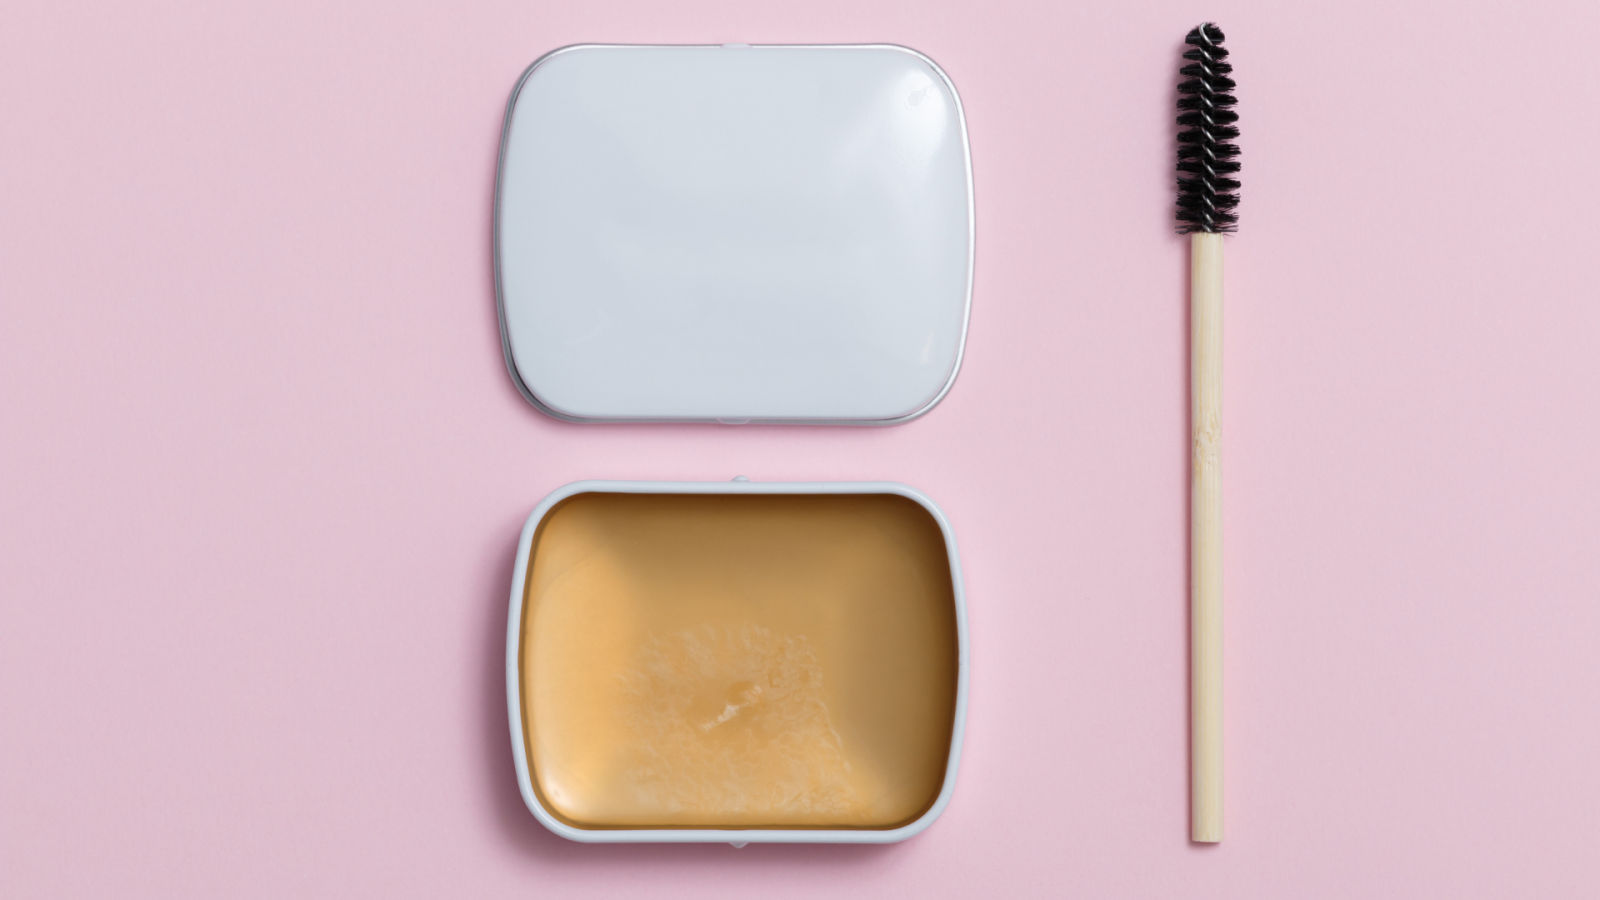 These makeup brush cleaners will leave your tools squeaky clean